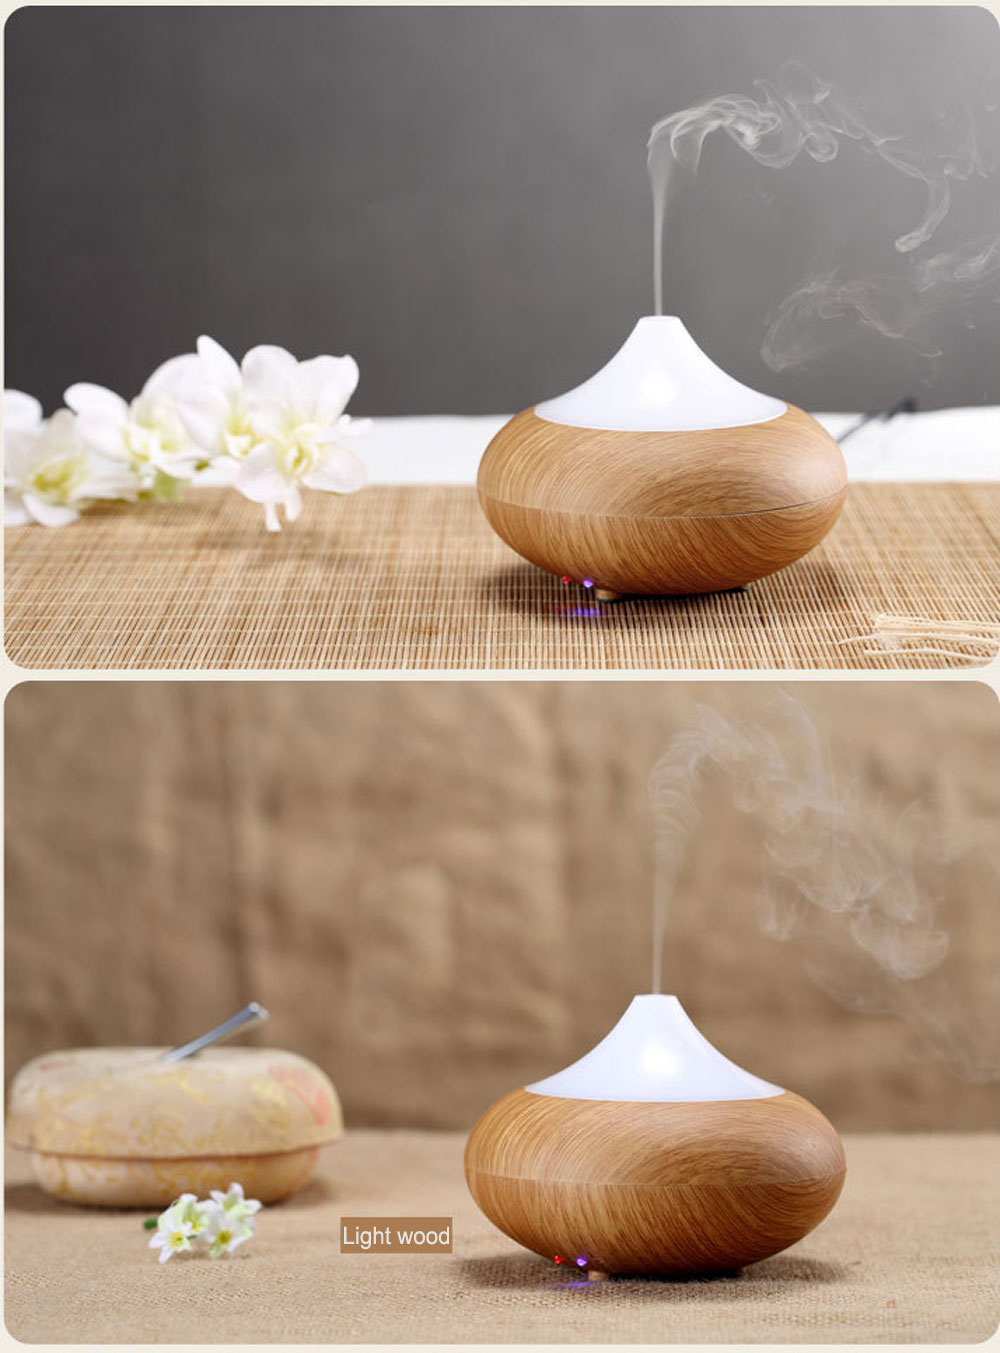 GX Diffuser GX - 02K Perfume Aromatherapy Diffuser Ultrasonic Humidifier Air Purifier LED Light for Home Conditioning